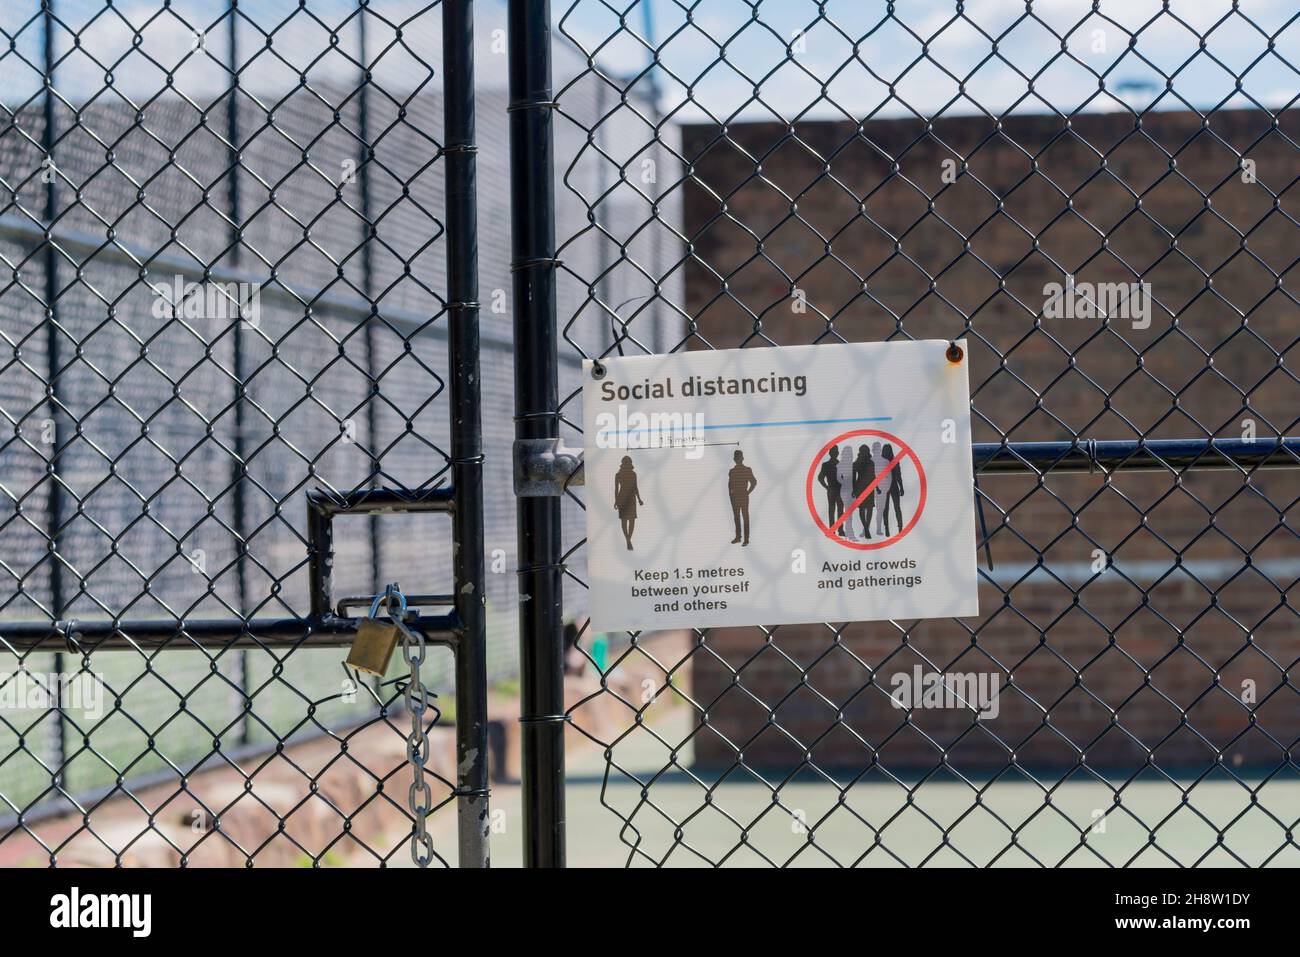 A social distancing Covid-19 sign at the gate to a tennis court in Sydney, Australia Stock Photo